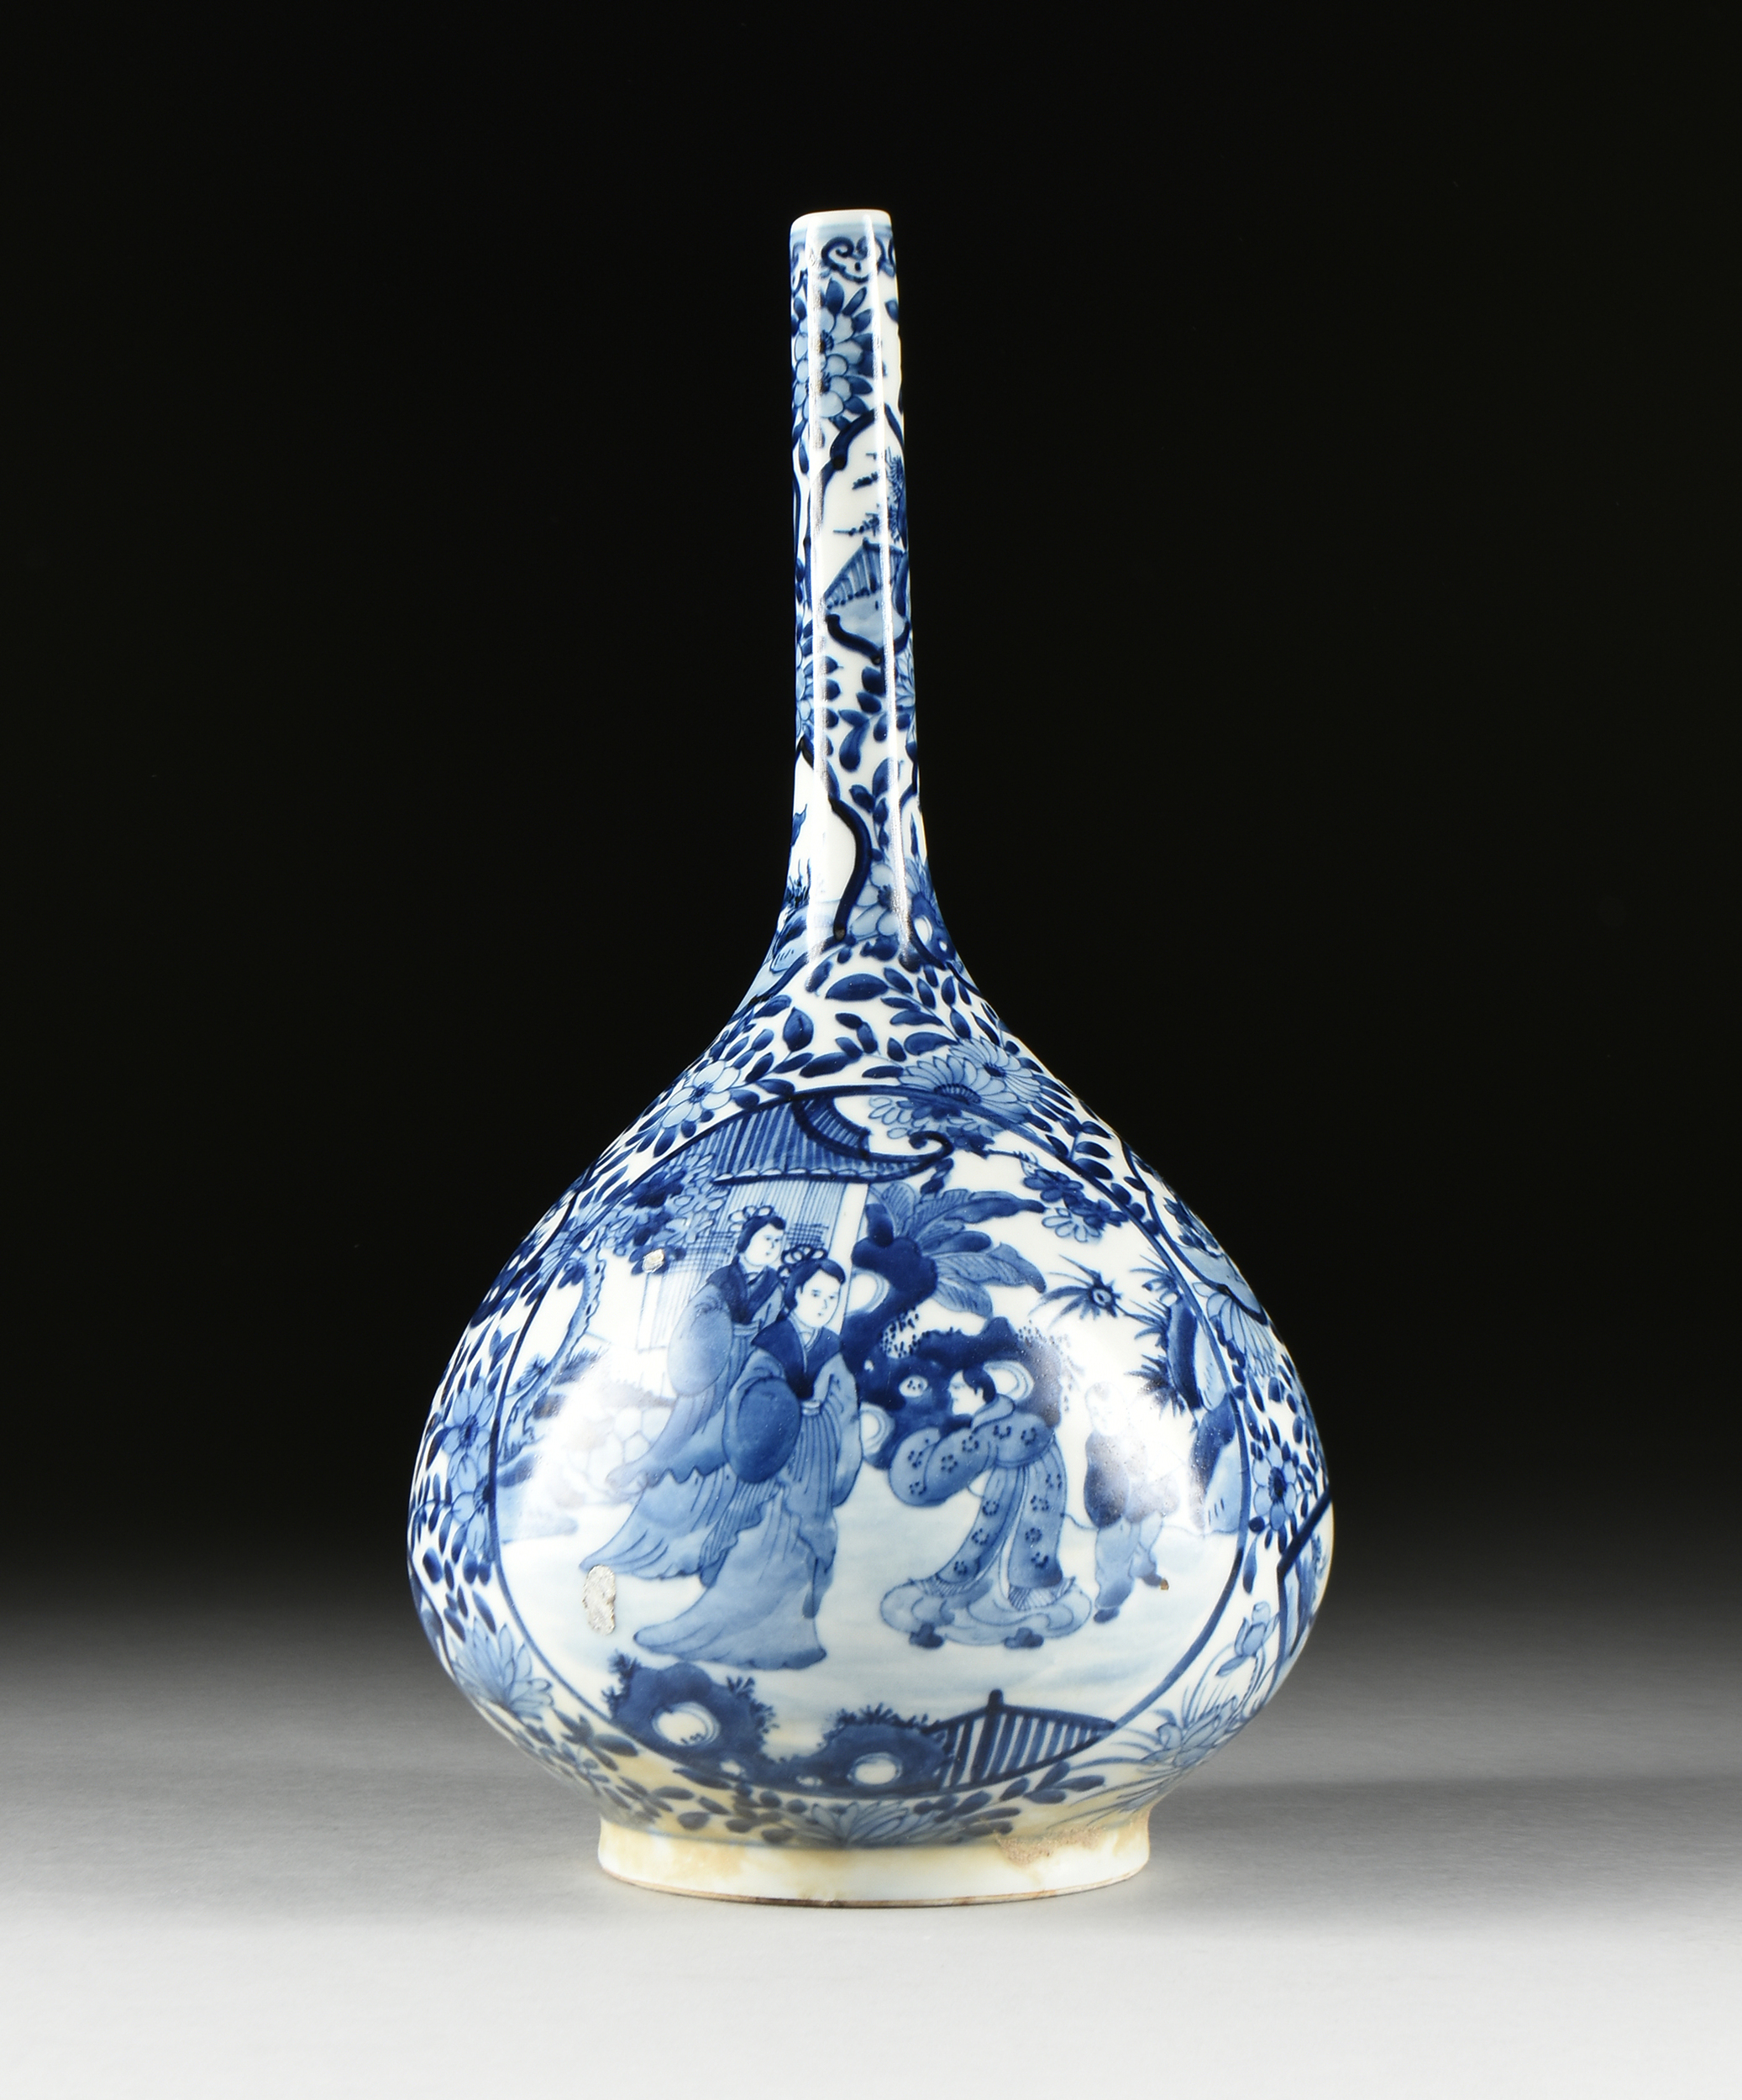 A QING DYNASTY BLUE AND WHITE PORCELAIN BOTTLE VASE, SHIPWRECK ARTIFACT, ATTRIBUTED TO THE KANGXI